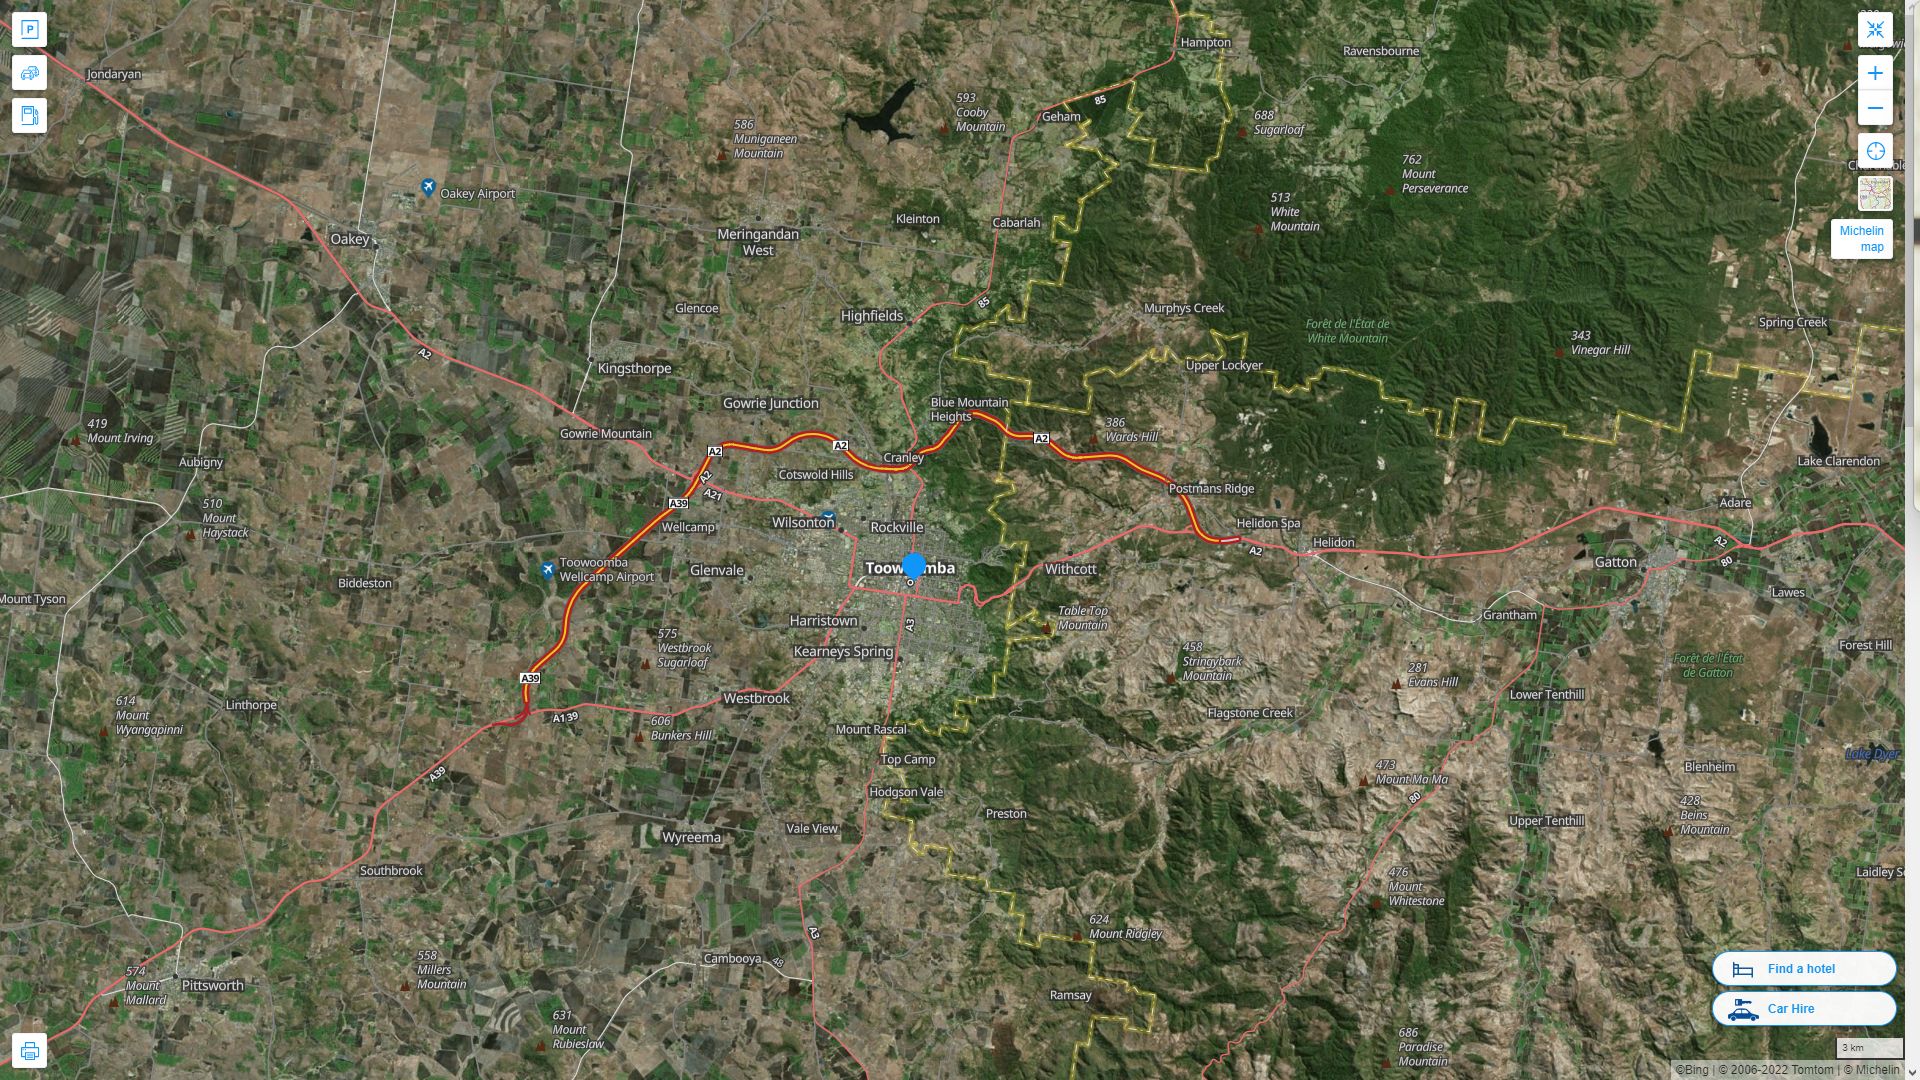 Toowoomba Highway and Road Map with Satellite View